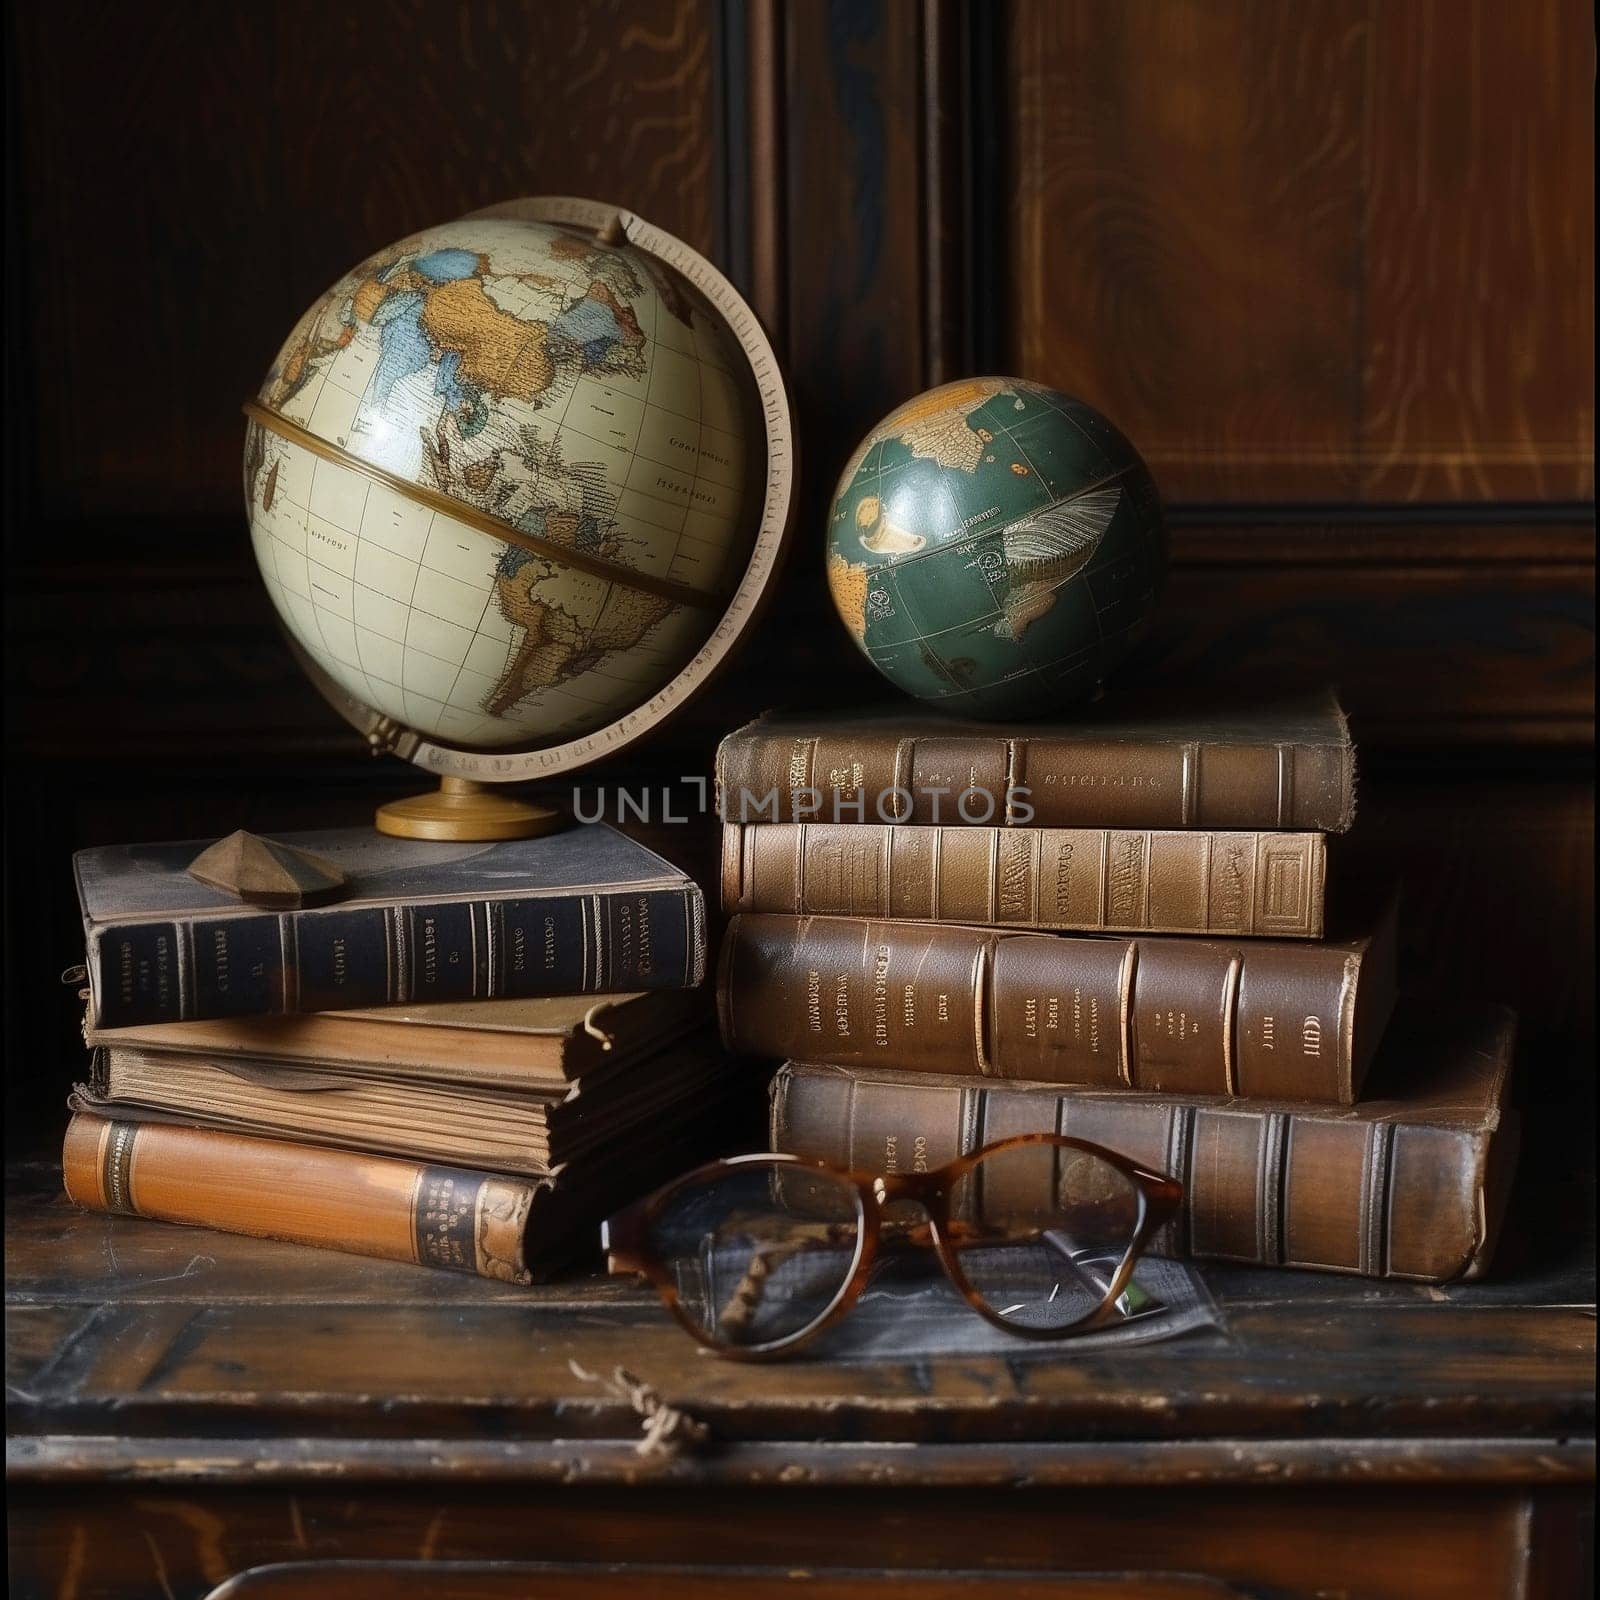 A still life of books, glasses and a globe for education. High quality illustration